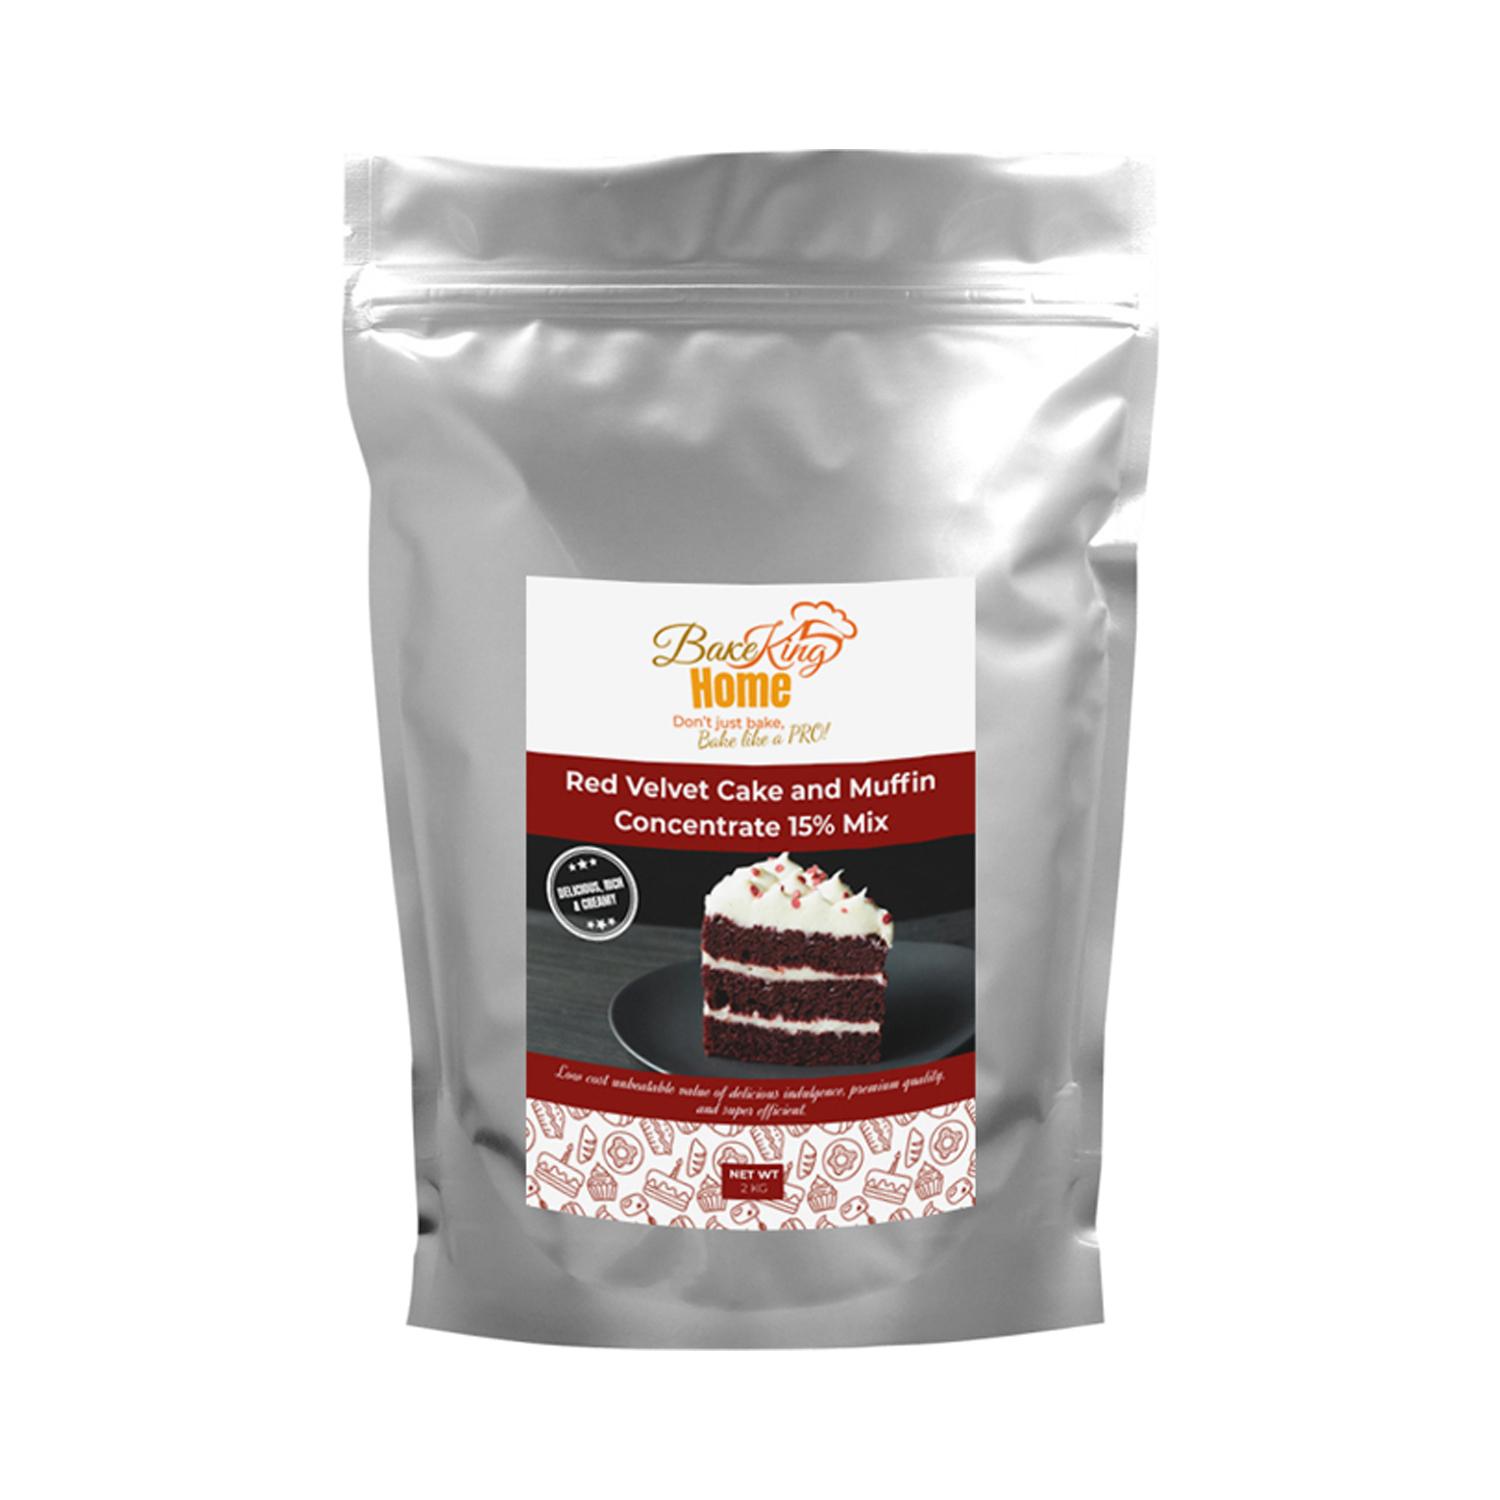 BAKEKING RED VELVET CAKE AND MUFFIN CONCENTRATE 2KG